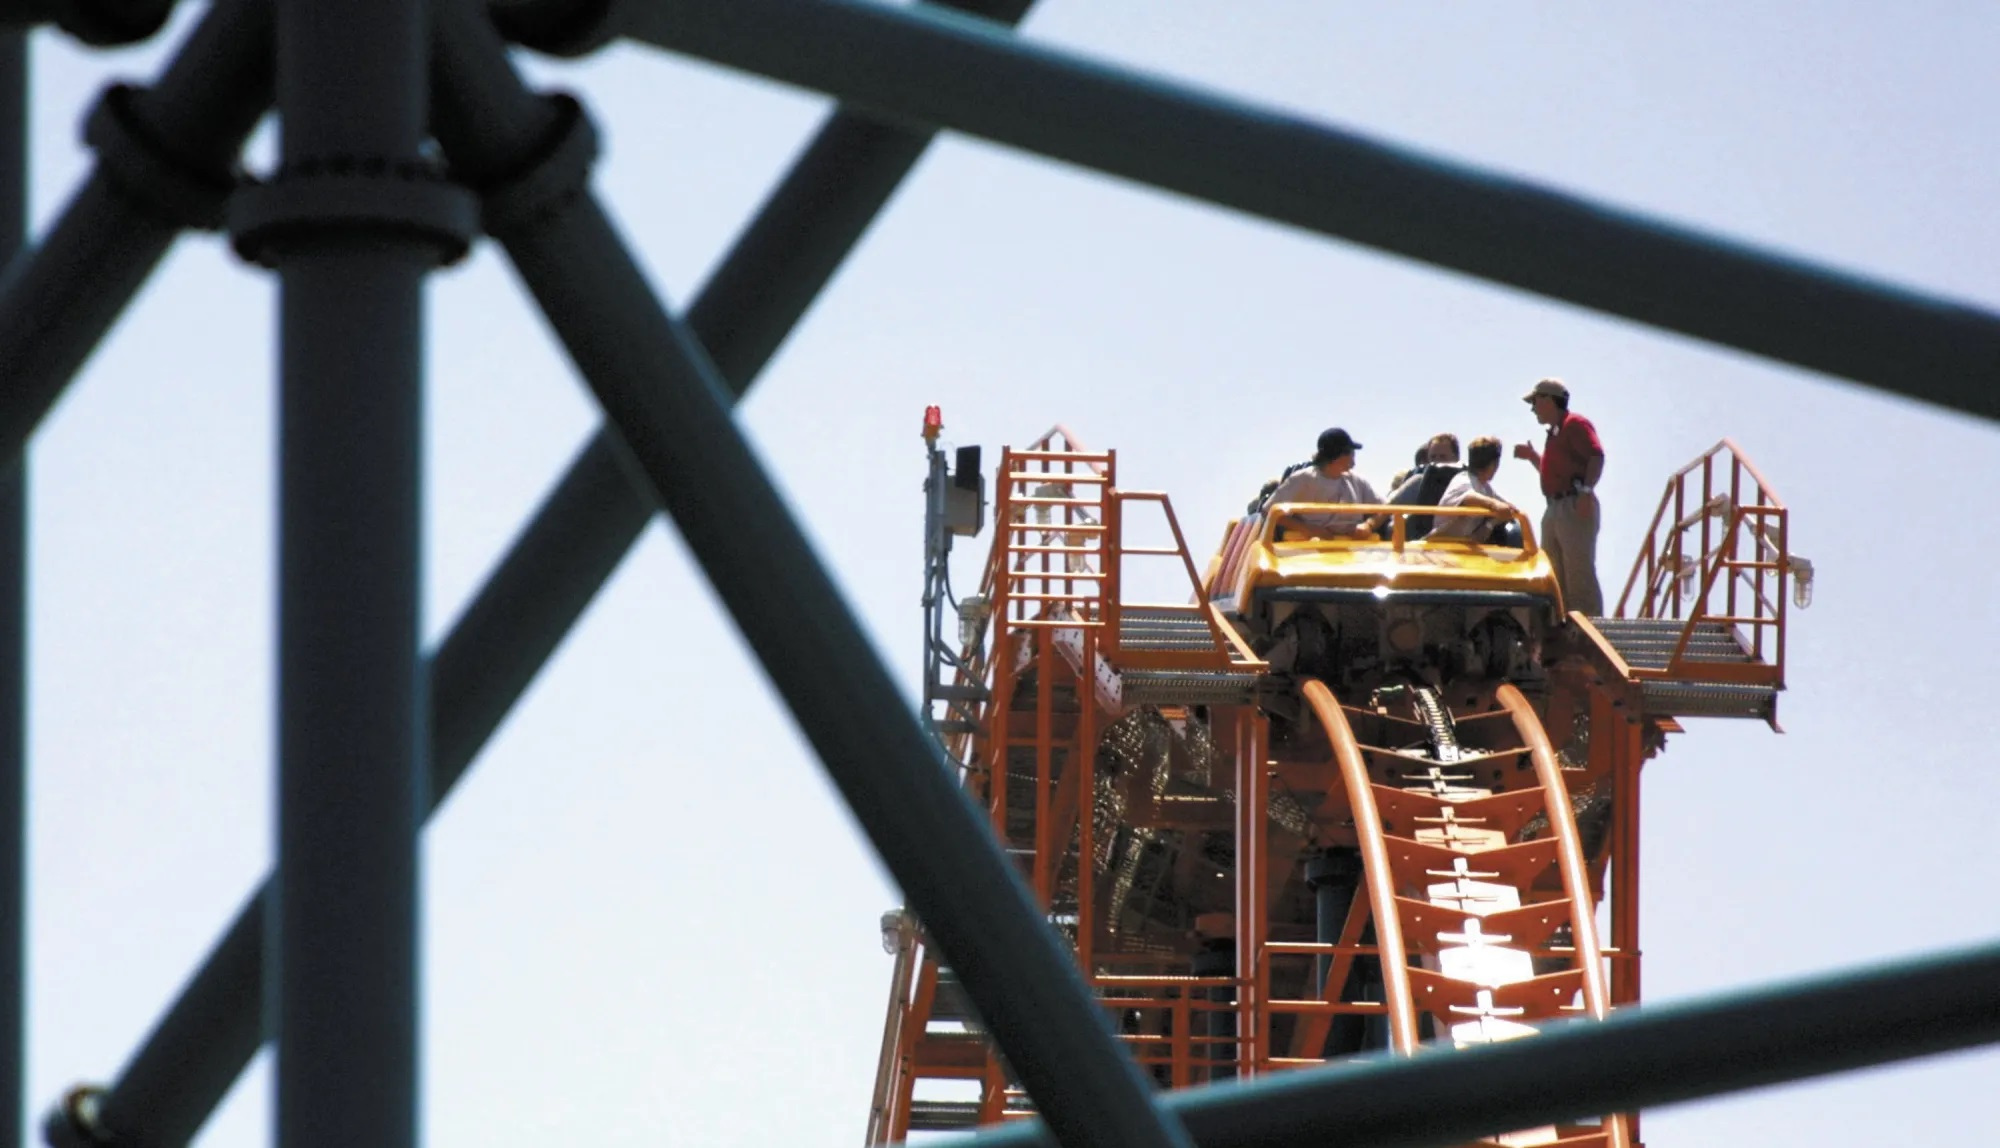 Users of Six Flags Mexico live moments of panic after being trapped in an amusement ride